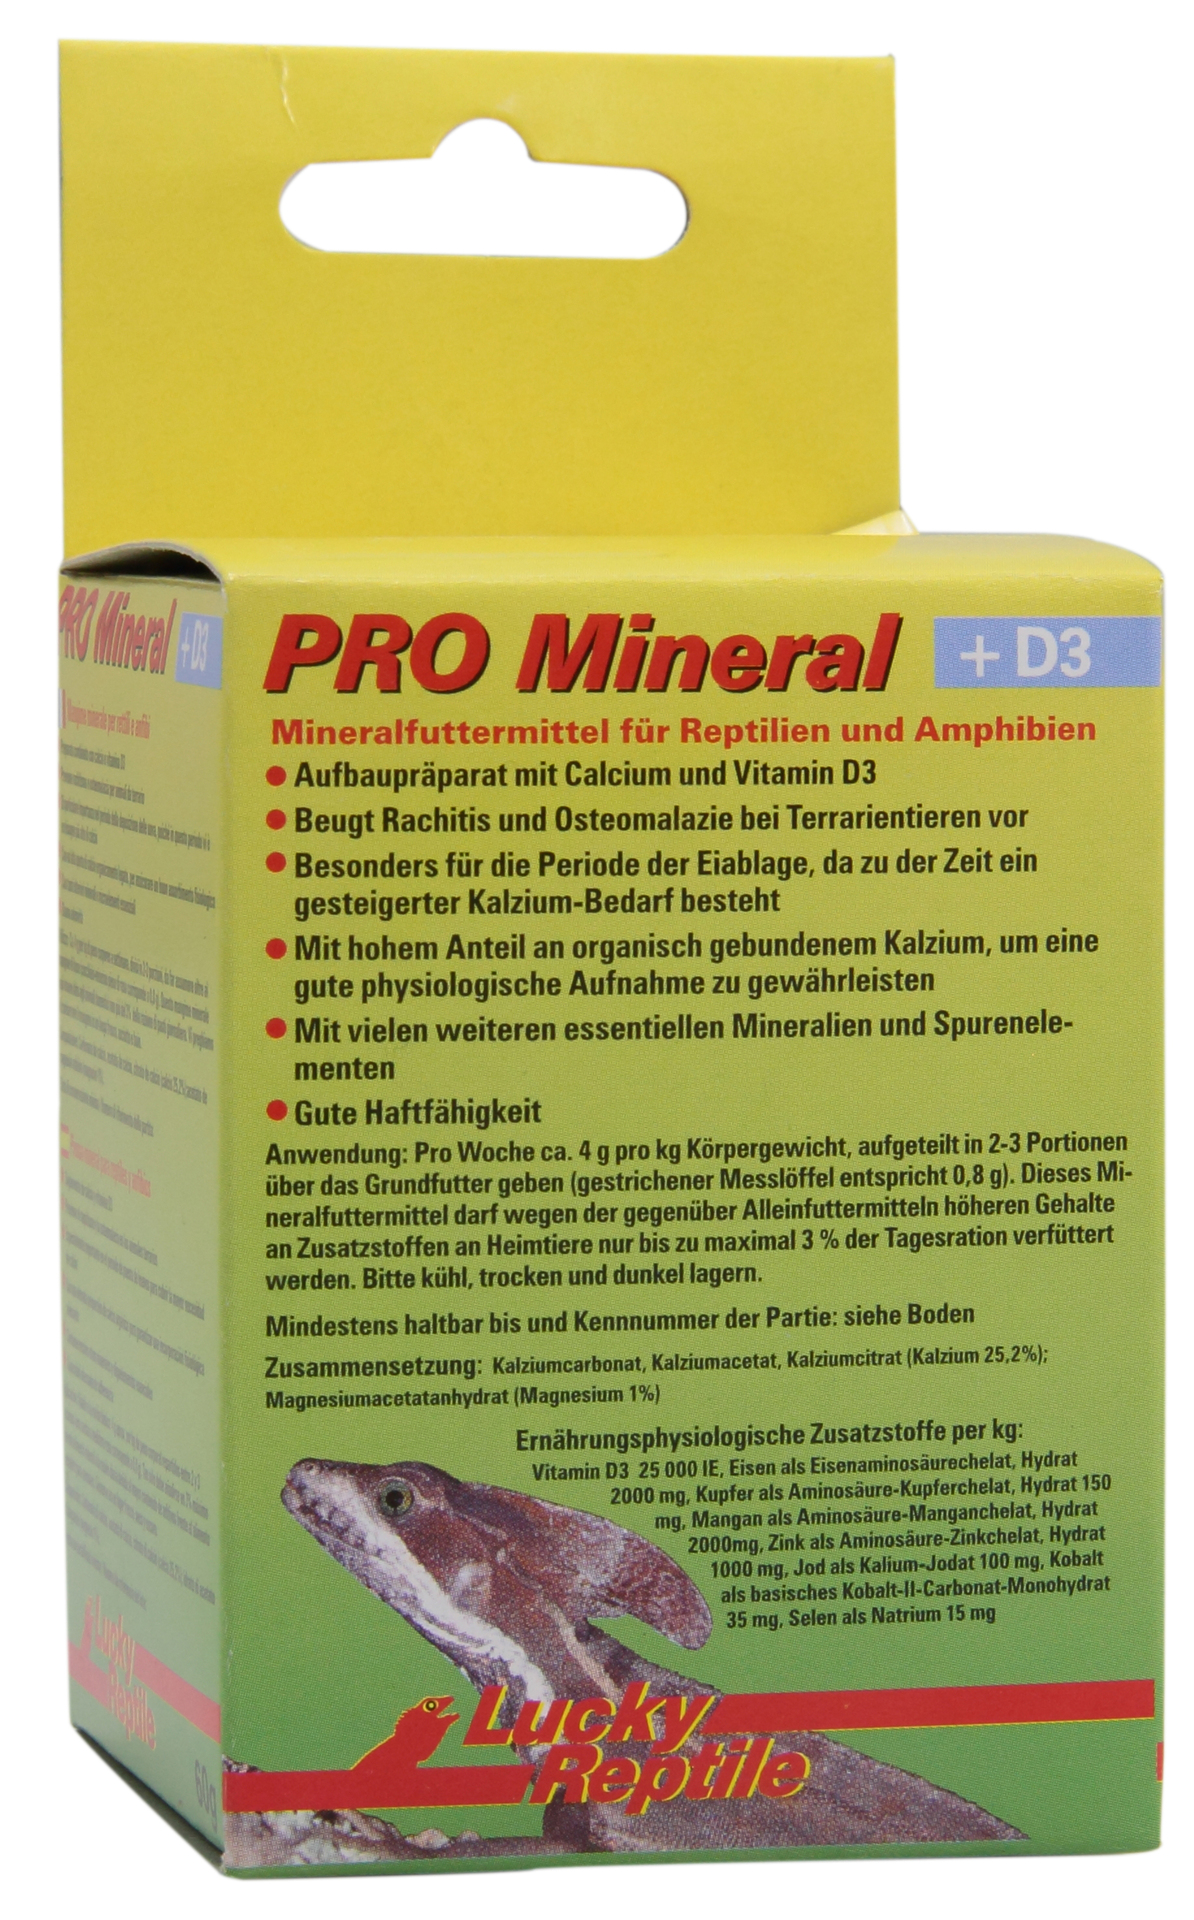 Import-Export Peter Hoch GmbH PRO Mineral mit D3 – 60 g